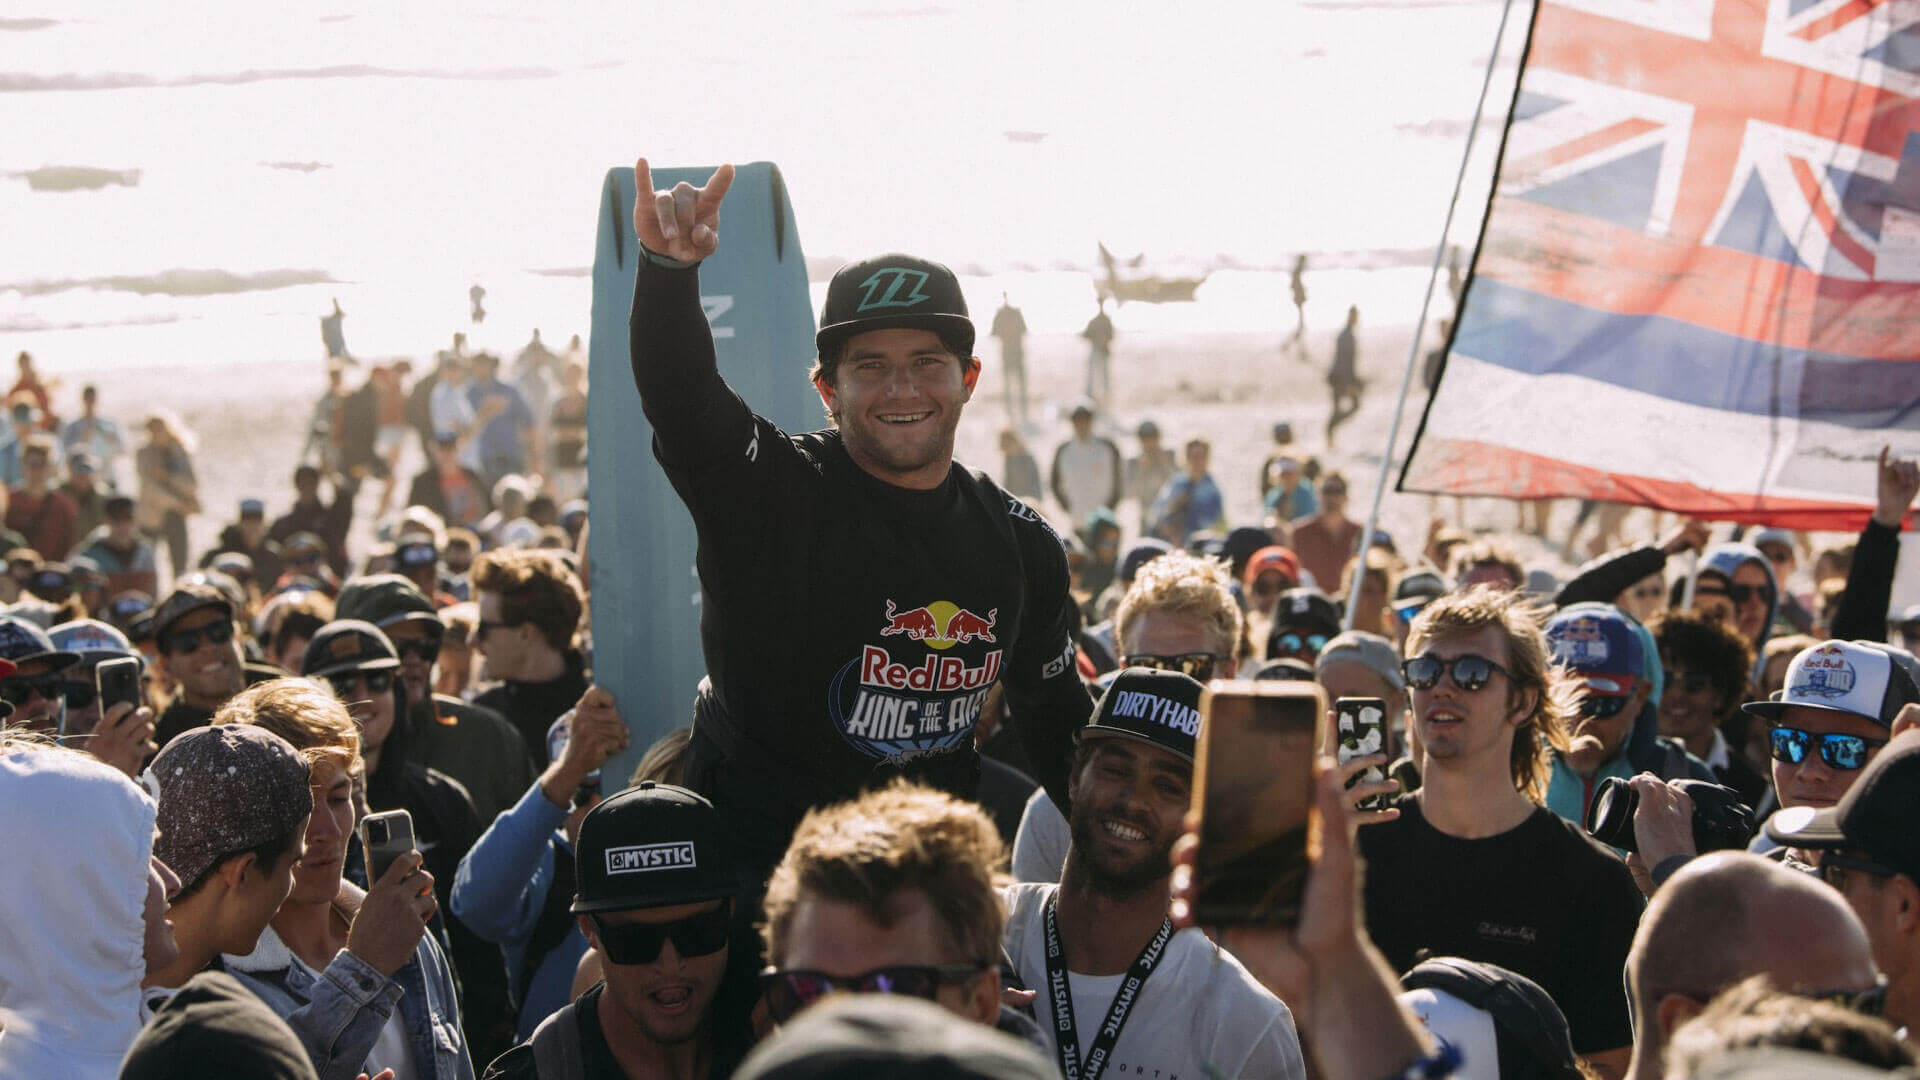 King of the Air RED BULL 2020